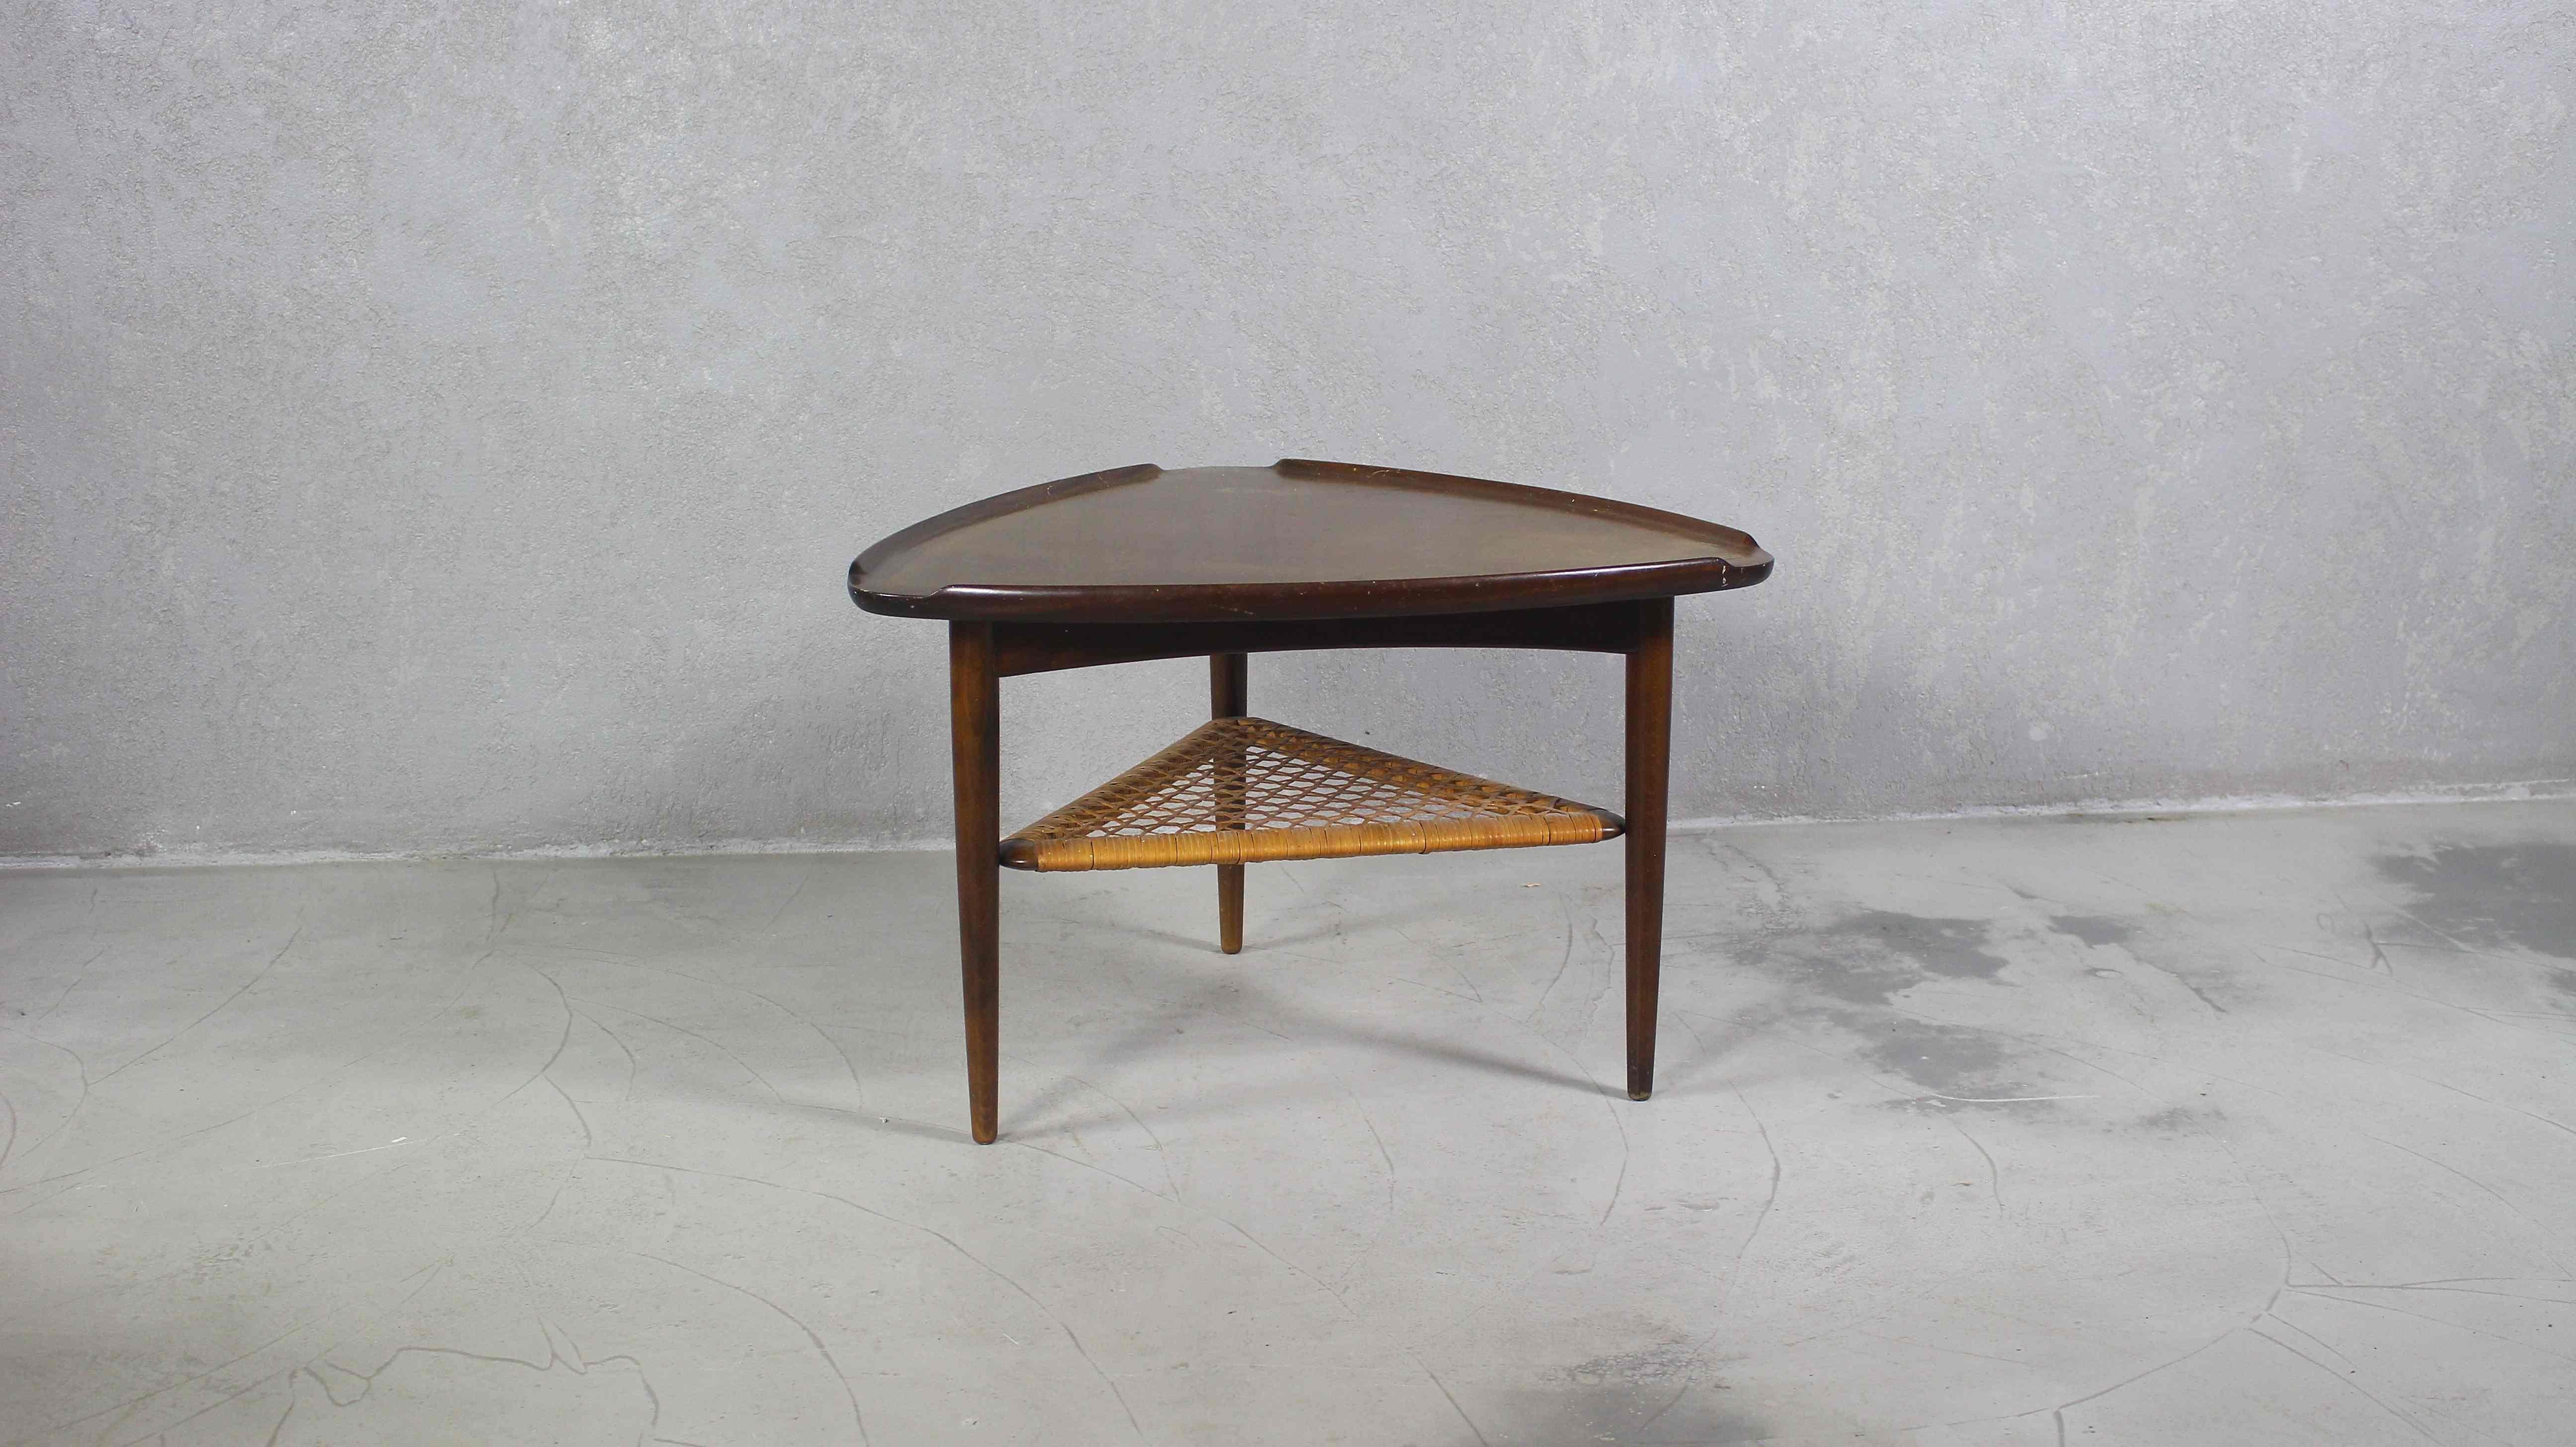 Danish Mid-Century Modern Poul Jensen for Selig guitar pick side tables,
occasional tables in teak woven cane.
Featuring a smooth seamed and lipped triangular surface with lower shelf wrapped in woven rattan.